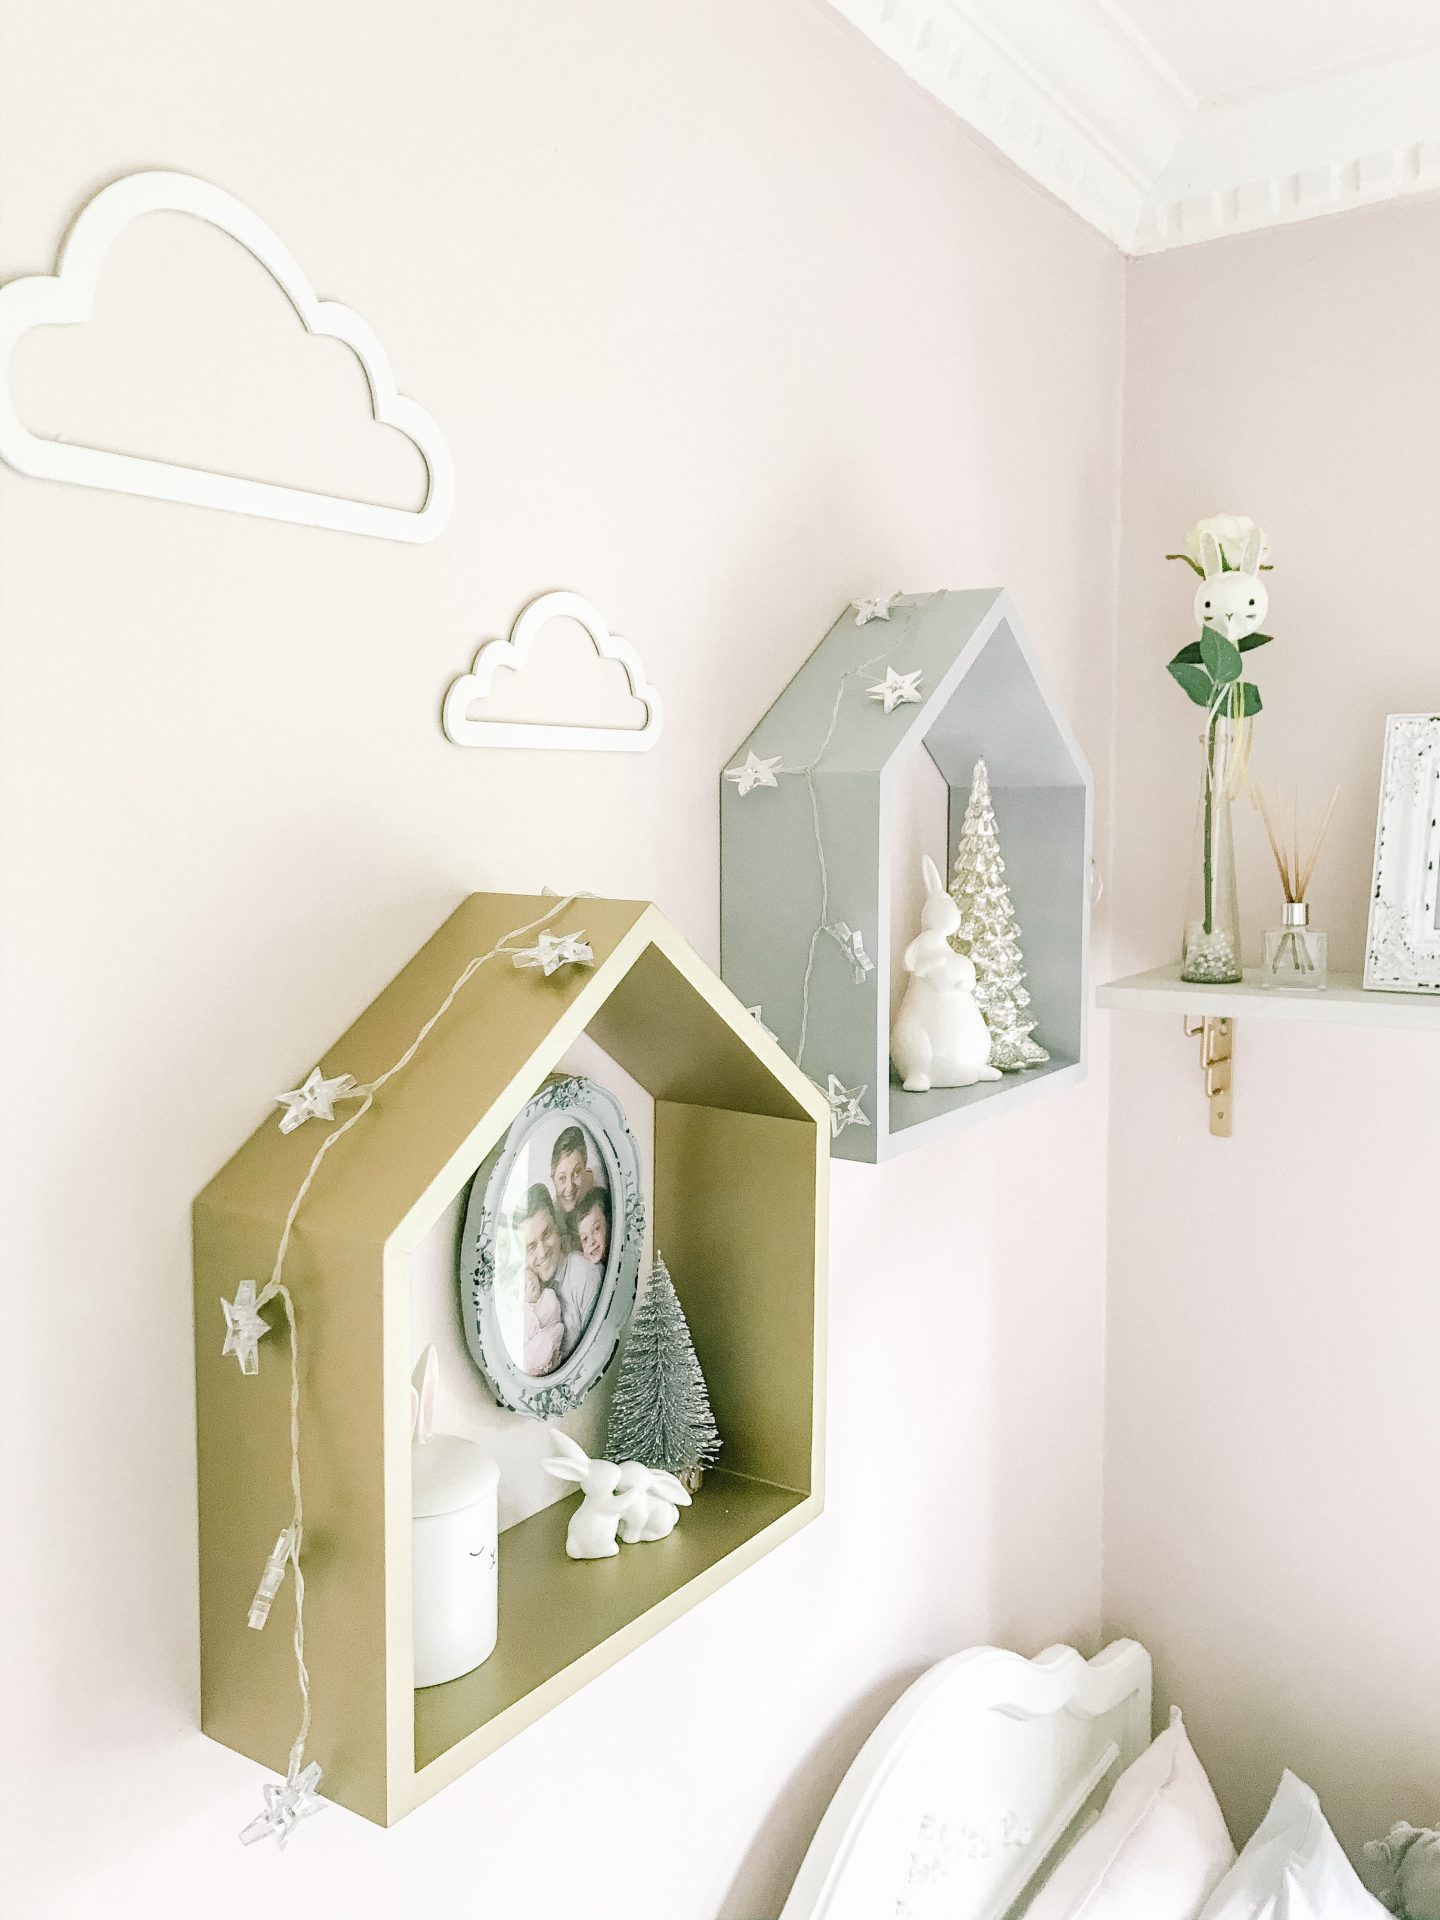 Sweet and simple touches of Christmas in a little girl's room